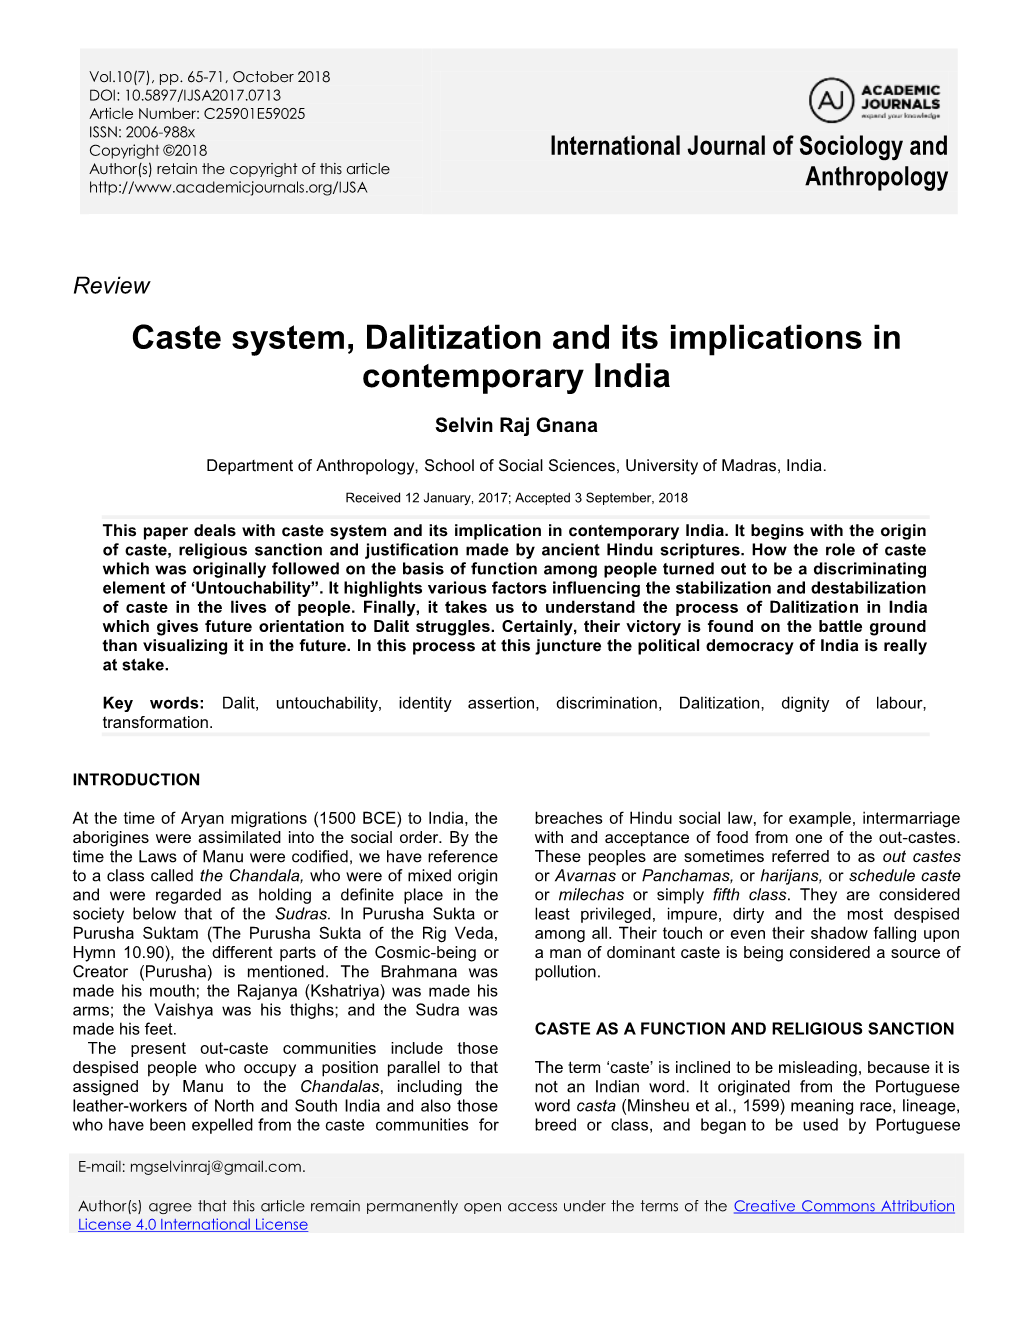 Caste System, Dalitization and Its Implications in Contemporary India